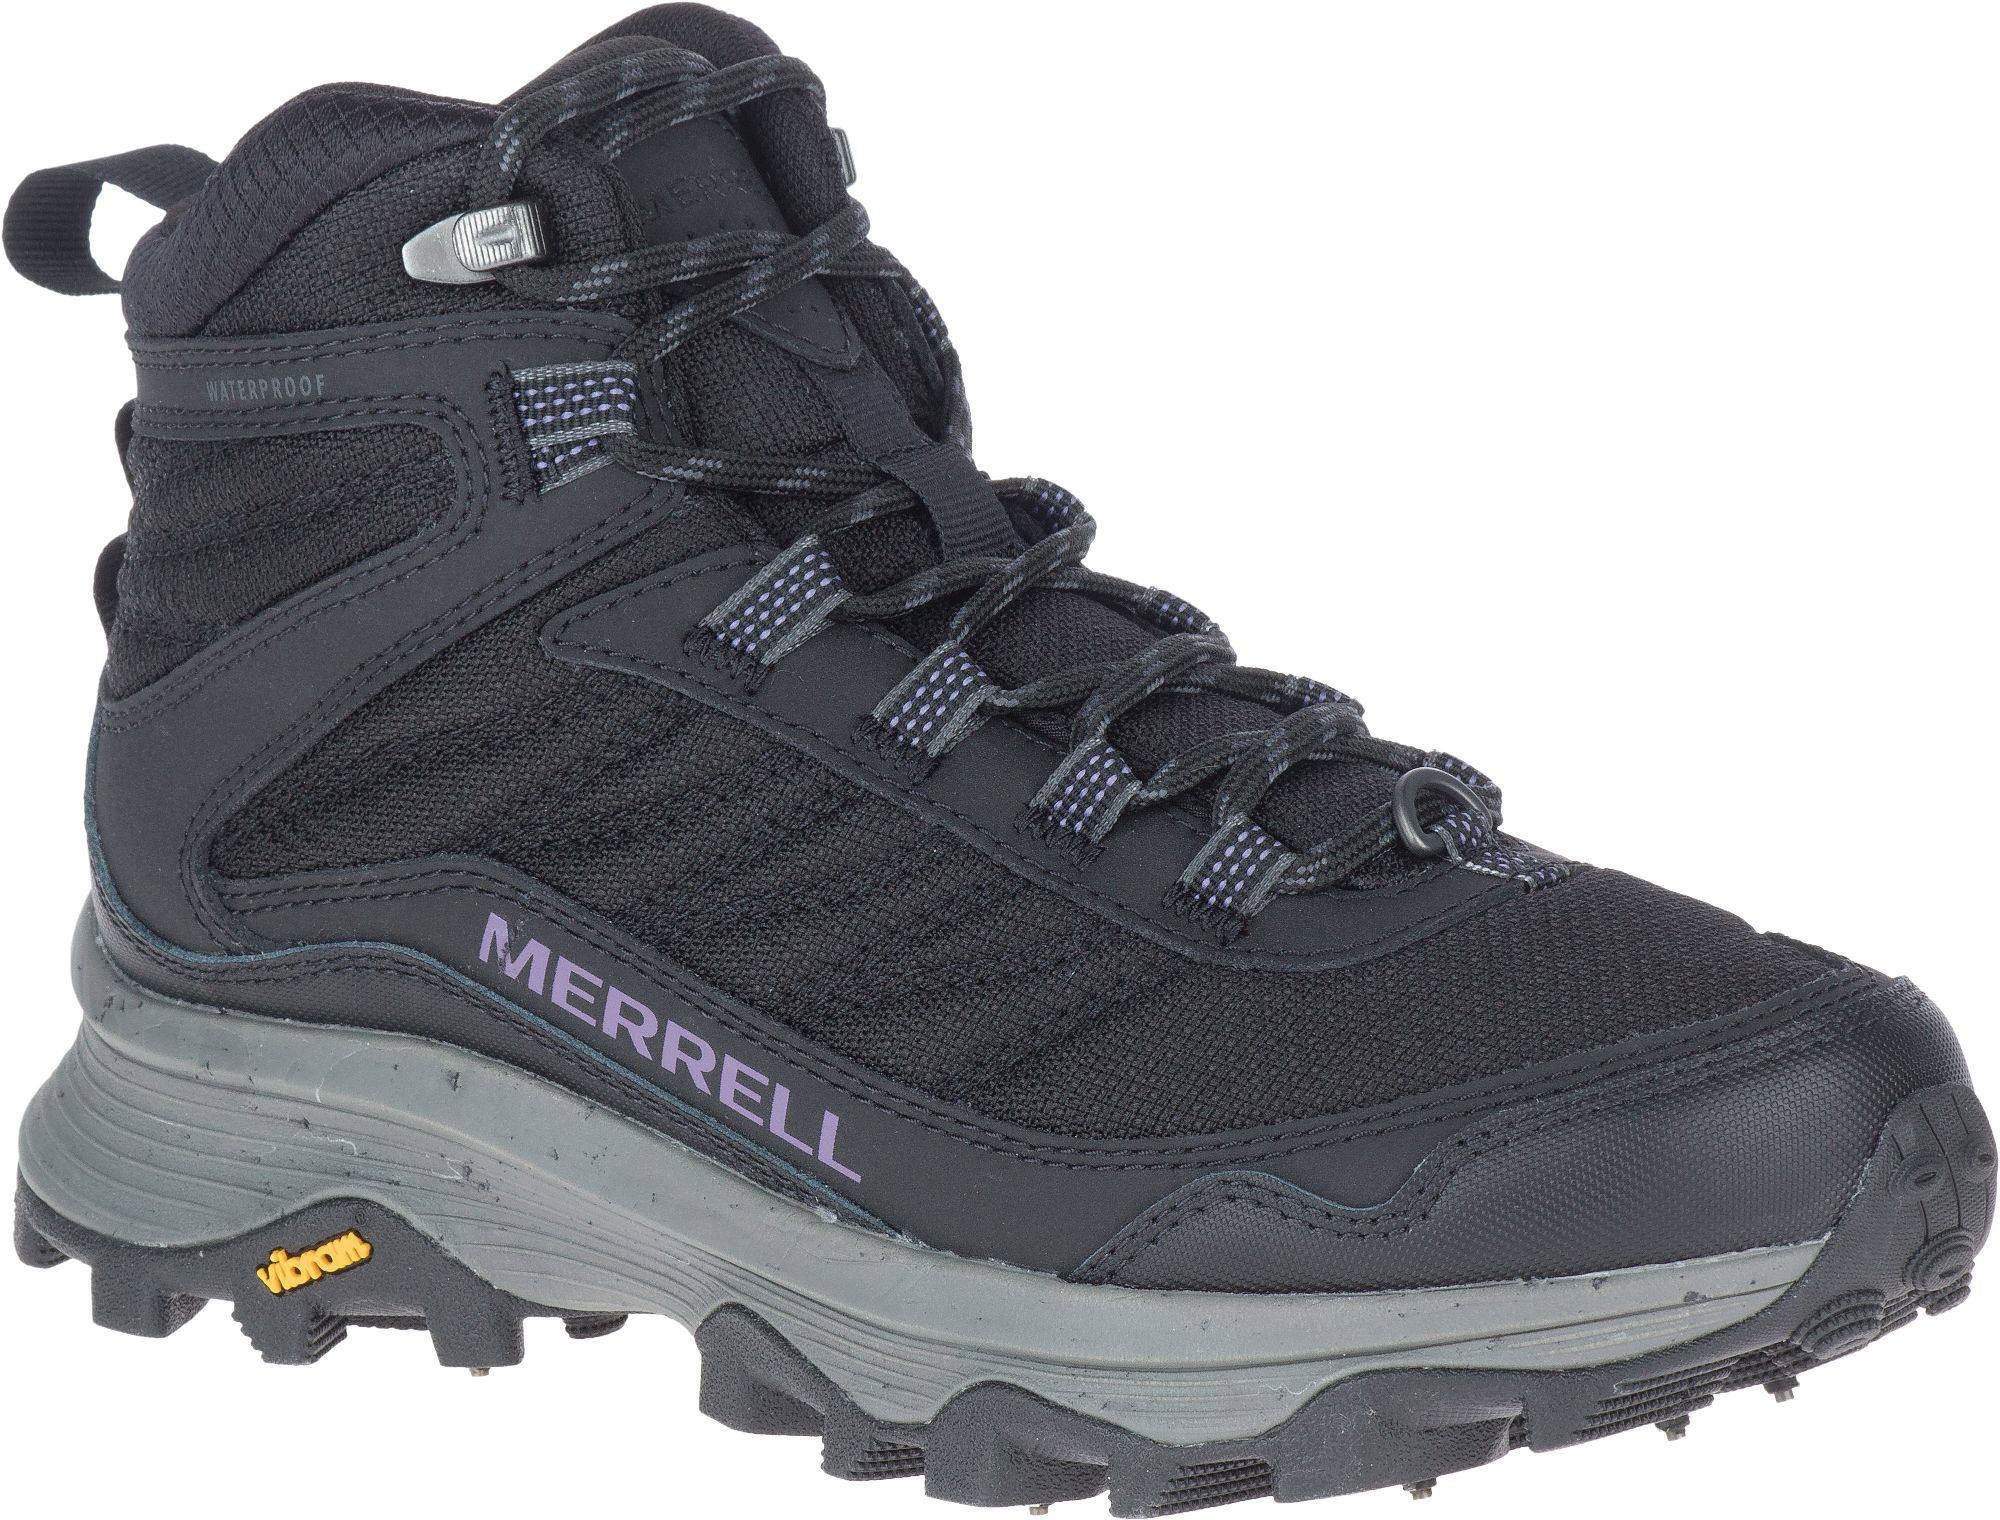 Merrell Women's Speed Thermo Spike Mid